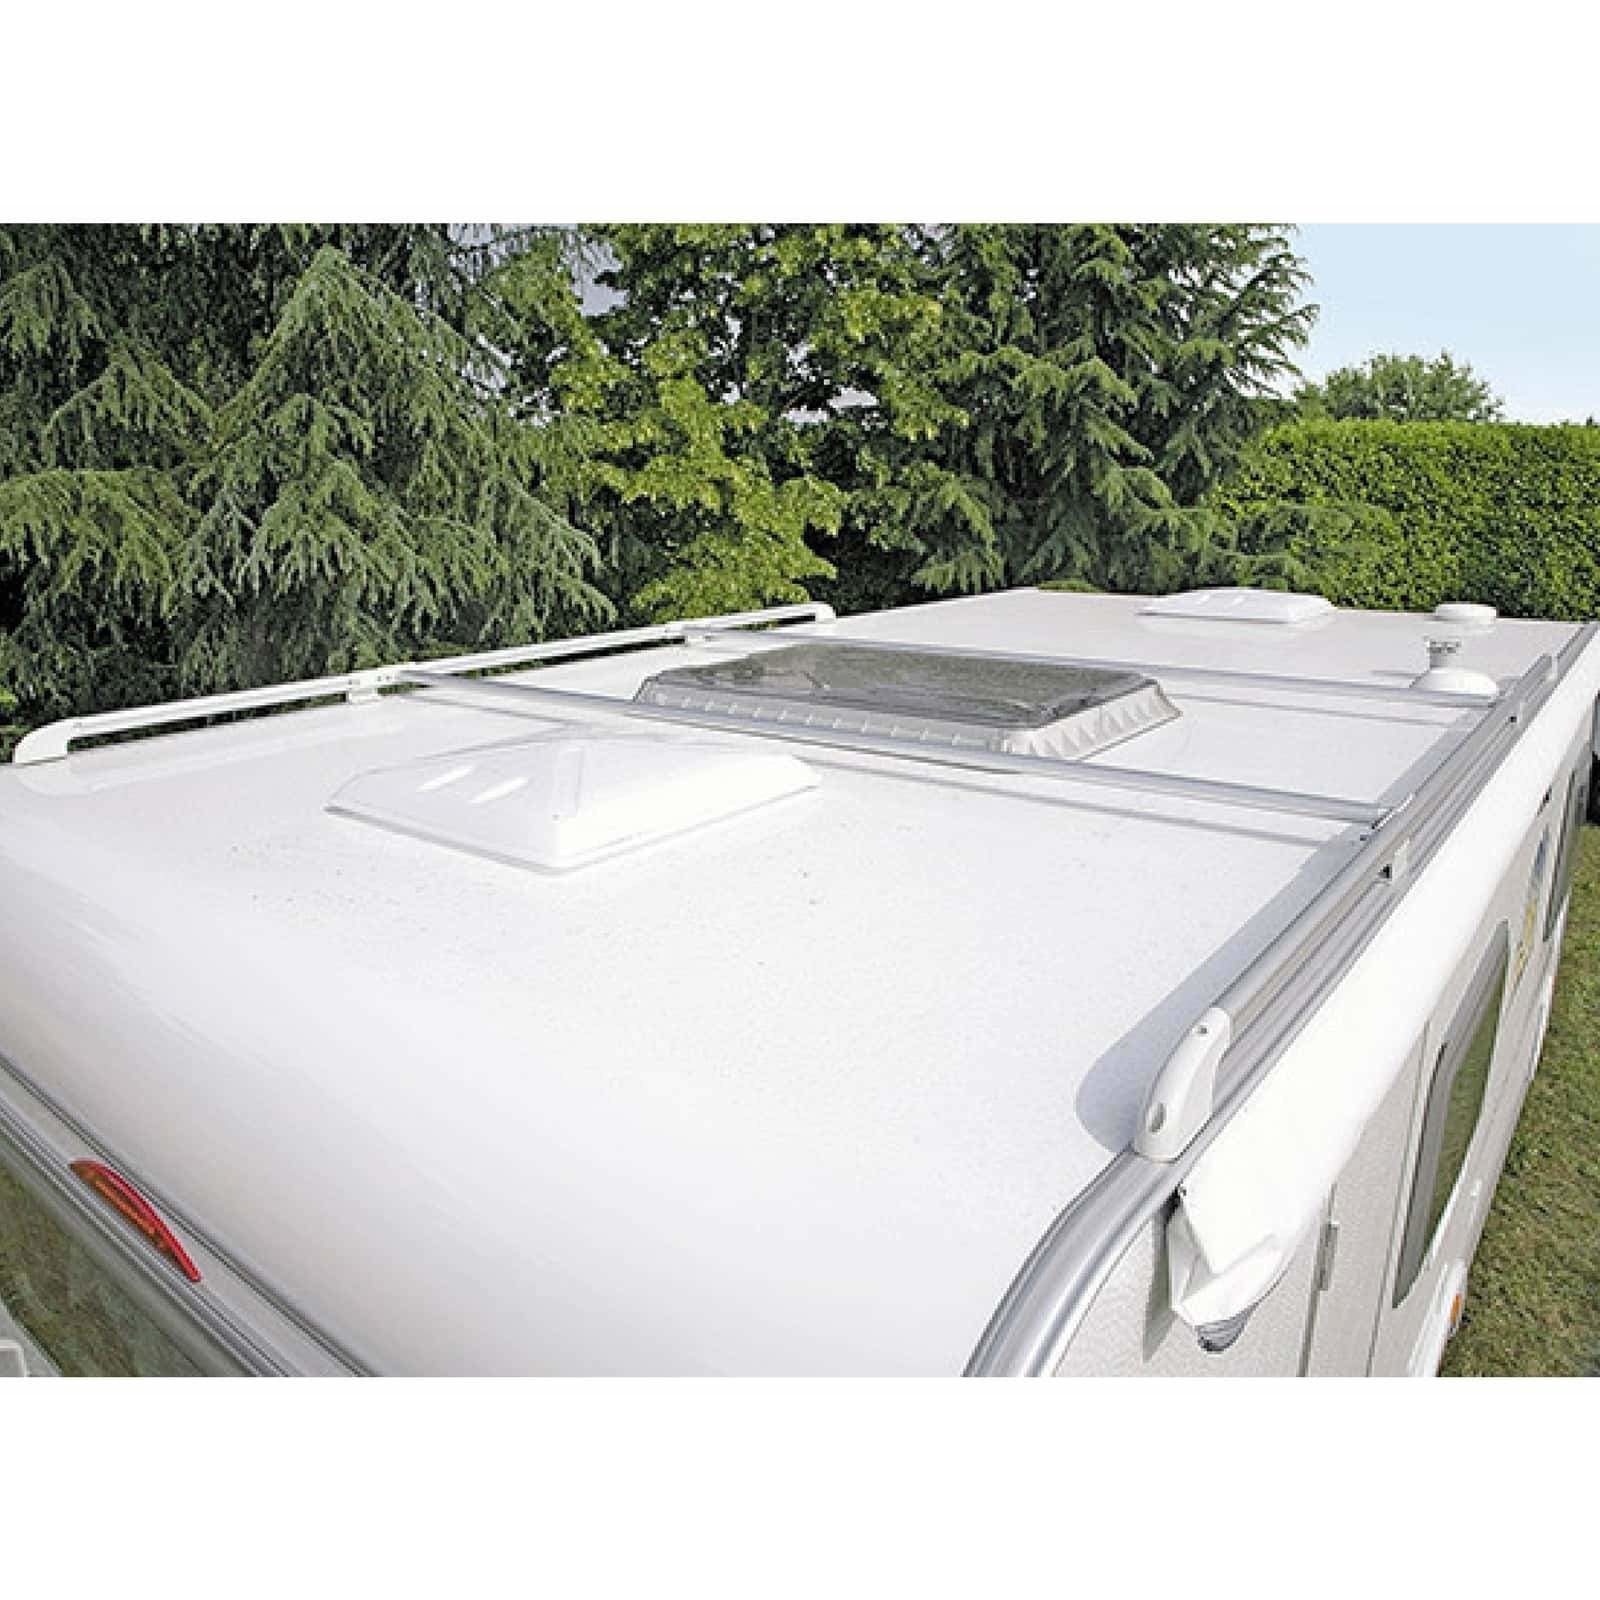 Fiamma Fixing-Bar Roof Rail made by Fiamma. A Accessories sold by Quality Caravan Awnings